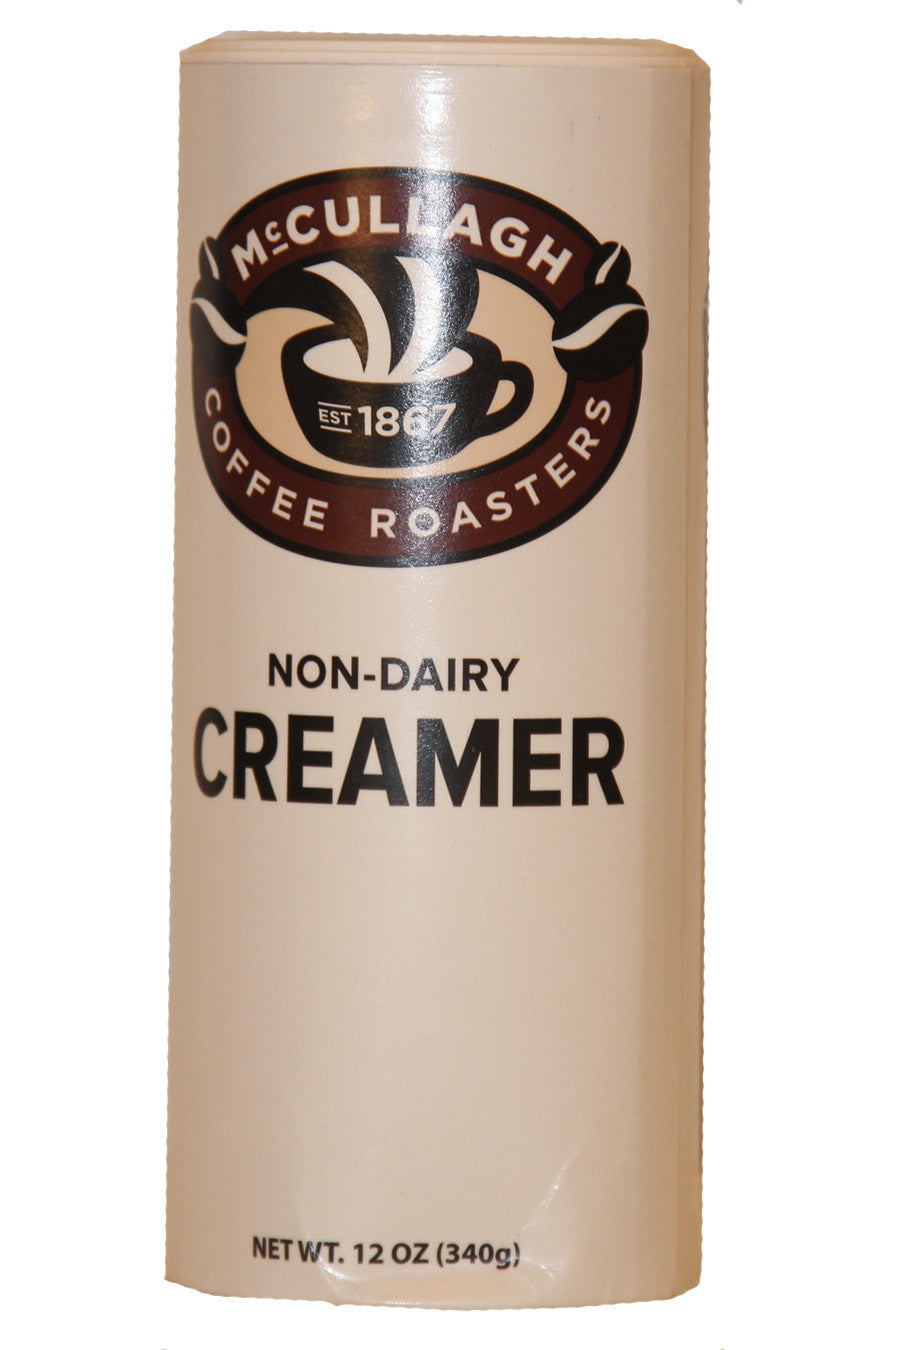 McCullagh Non-Dairy Cream Canister 12oz